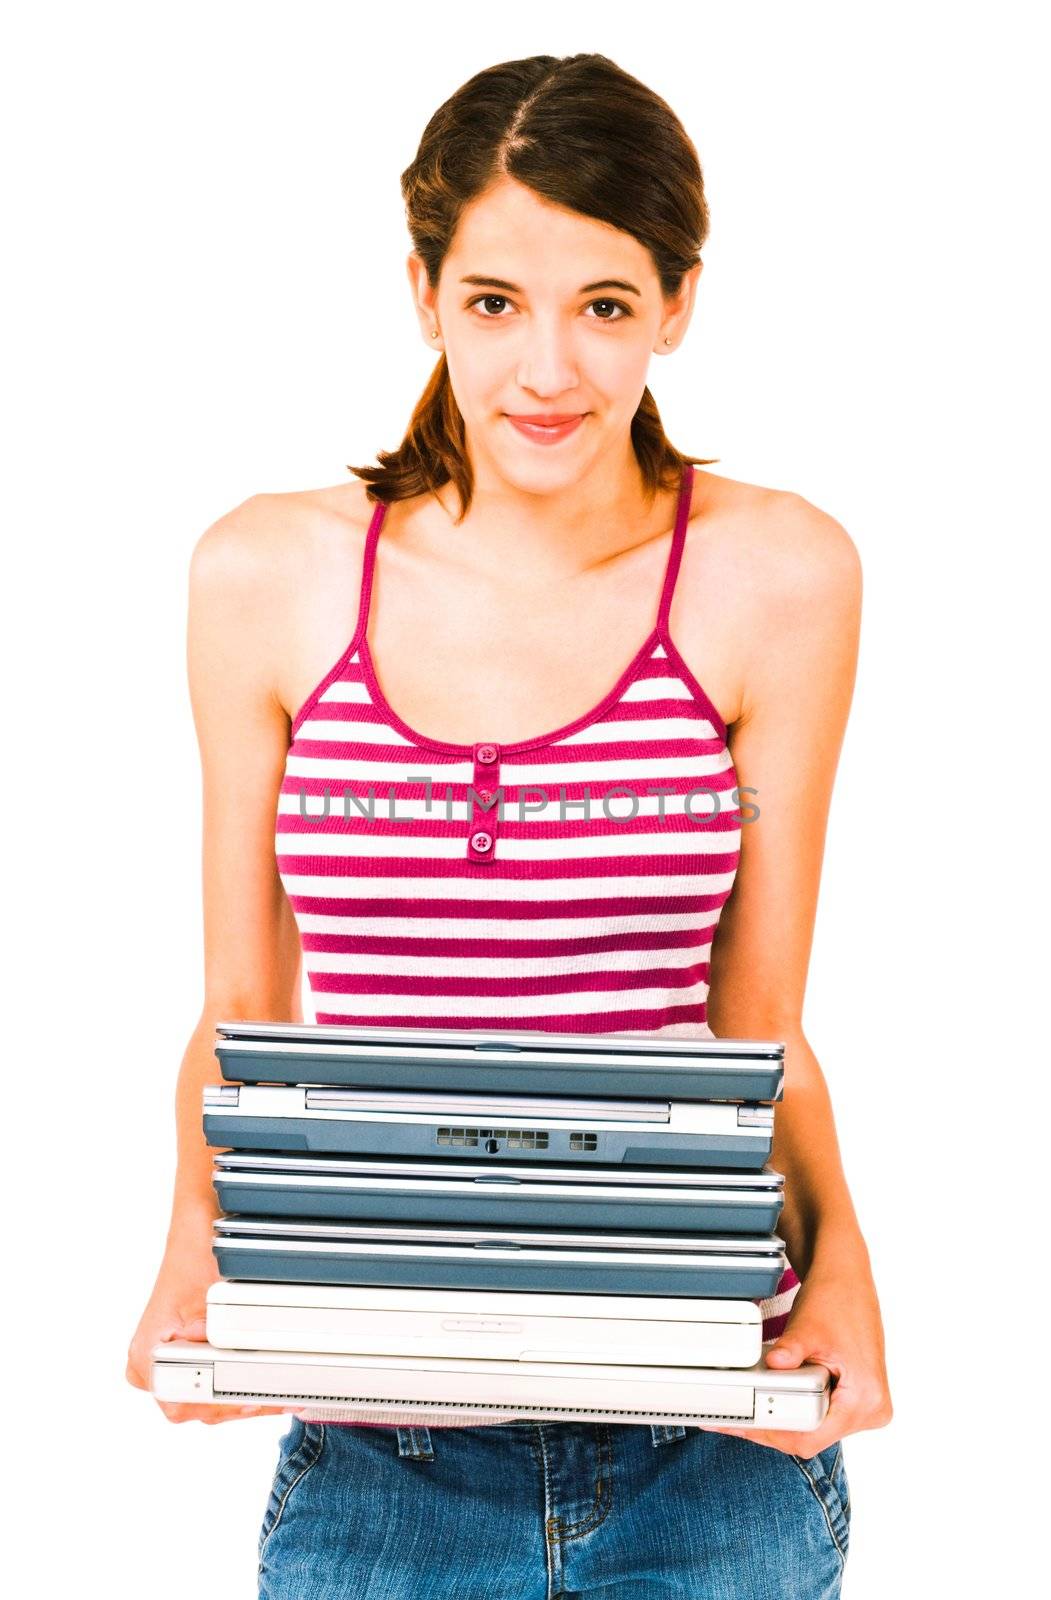 Happy woman holding stack of laptops  by jackmicro